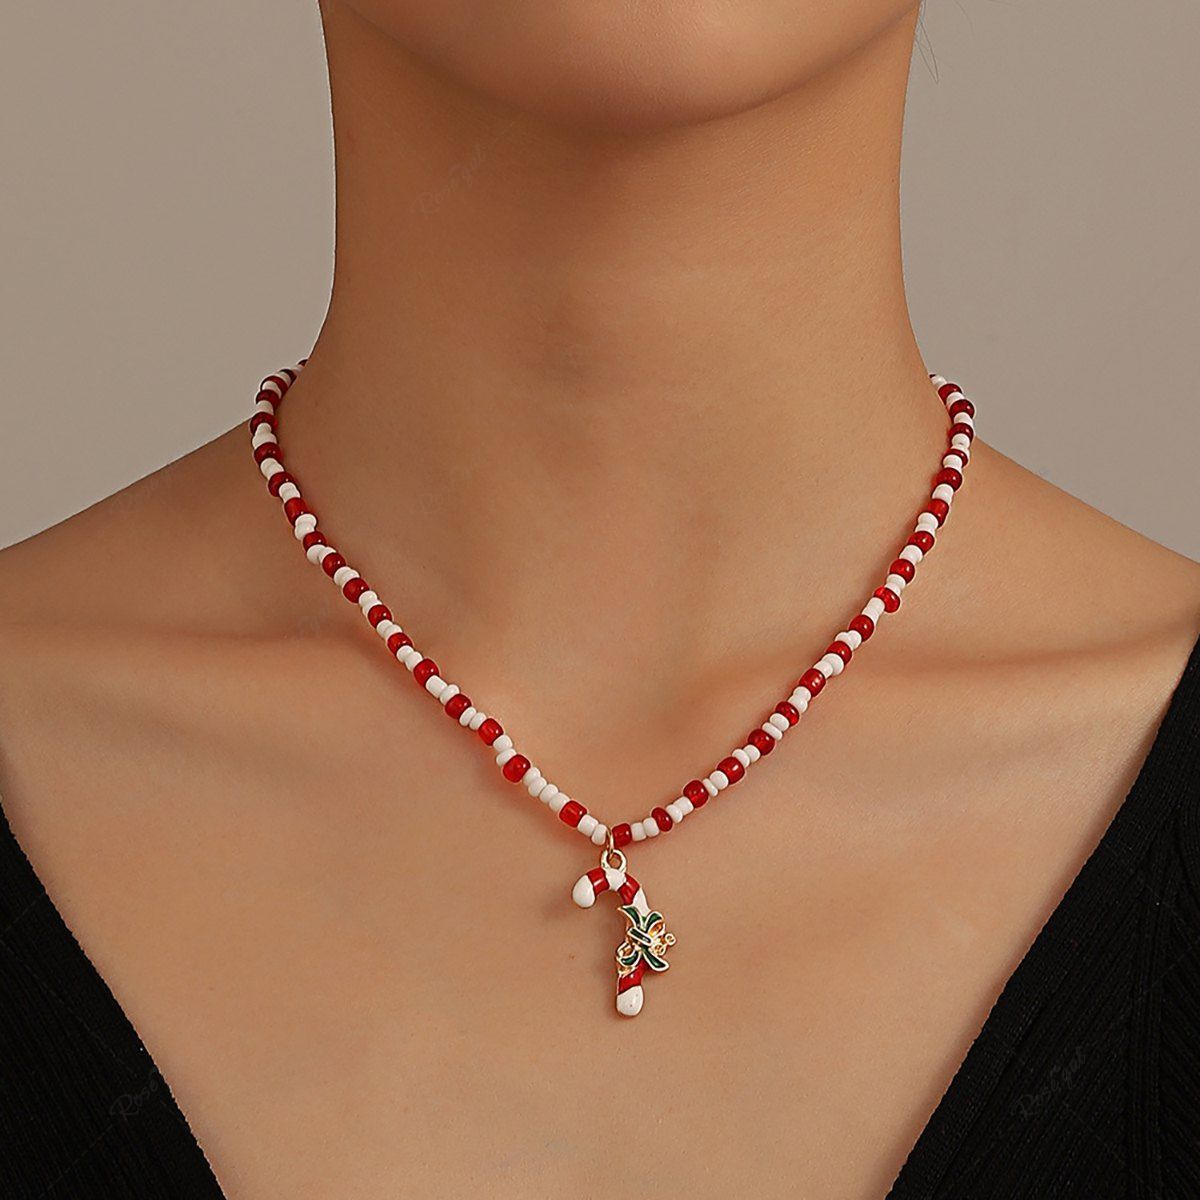 Discount Christmas Gift Beads Candy Cane Pendant Necklace  